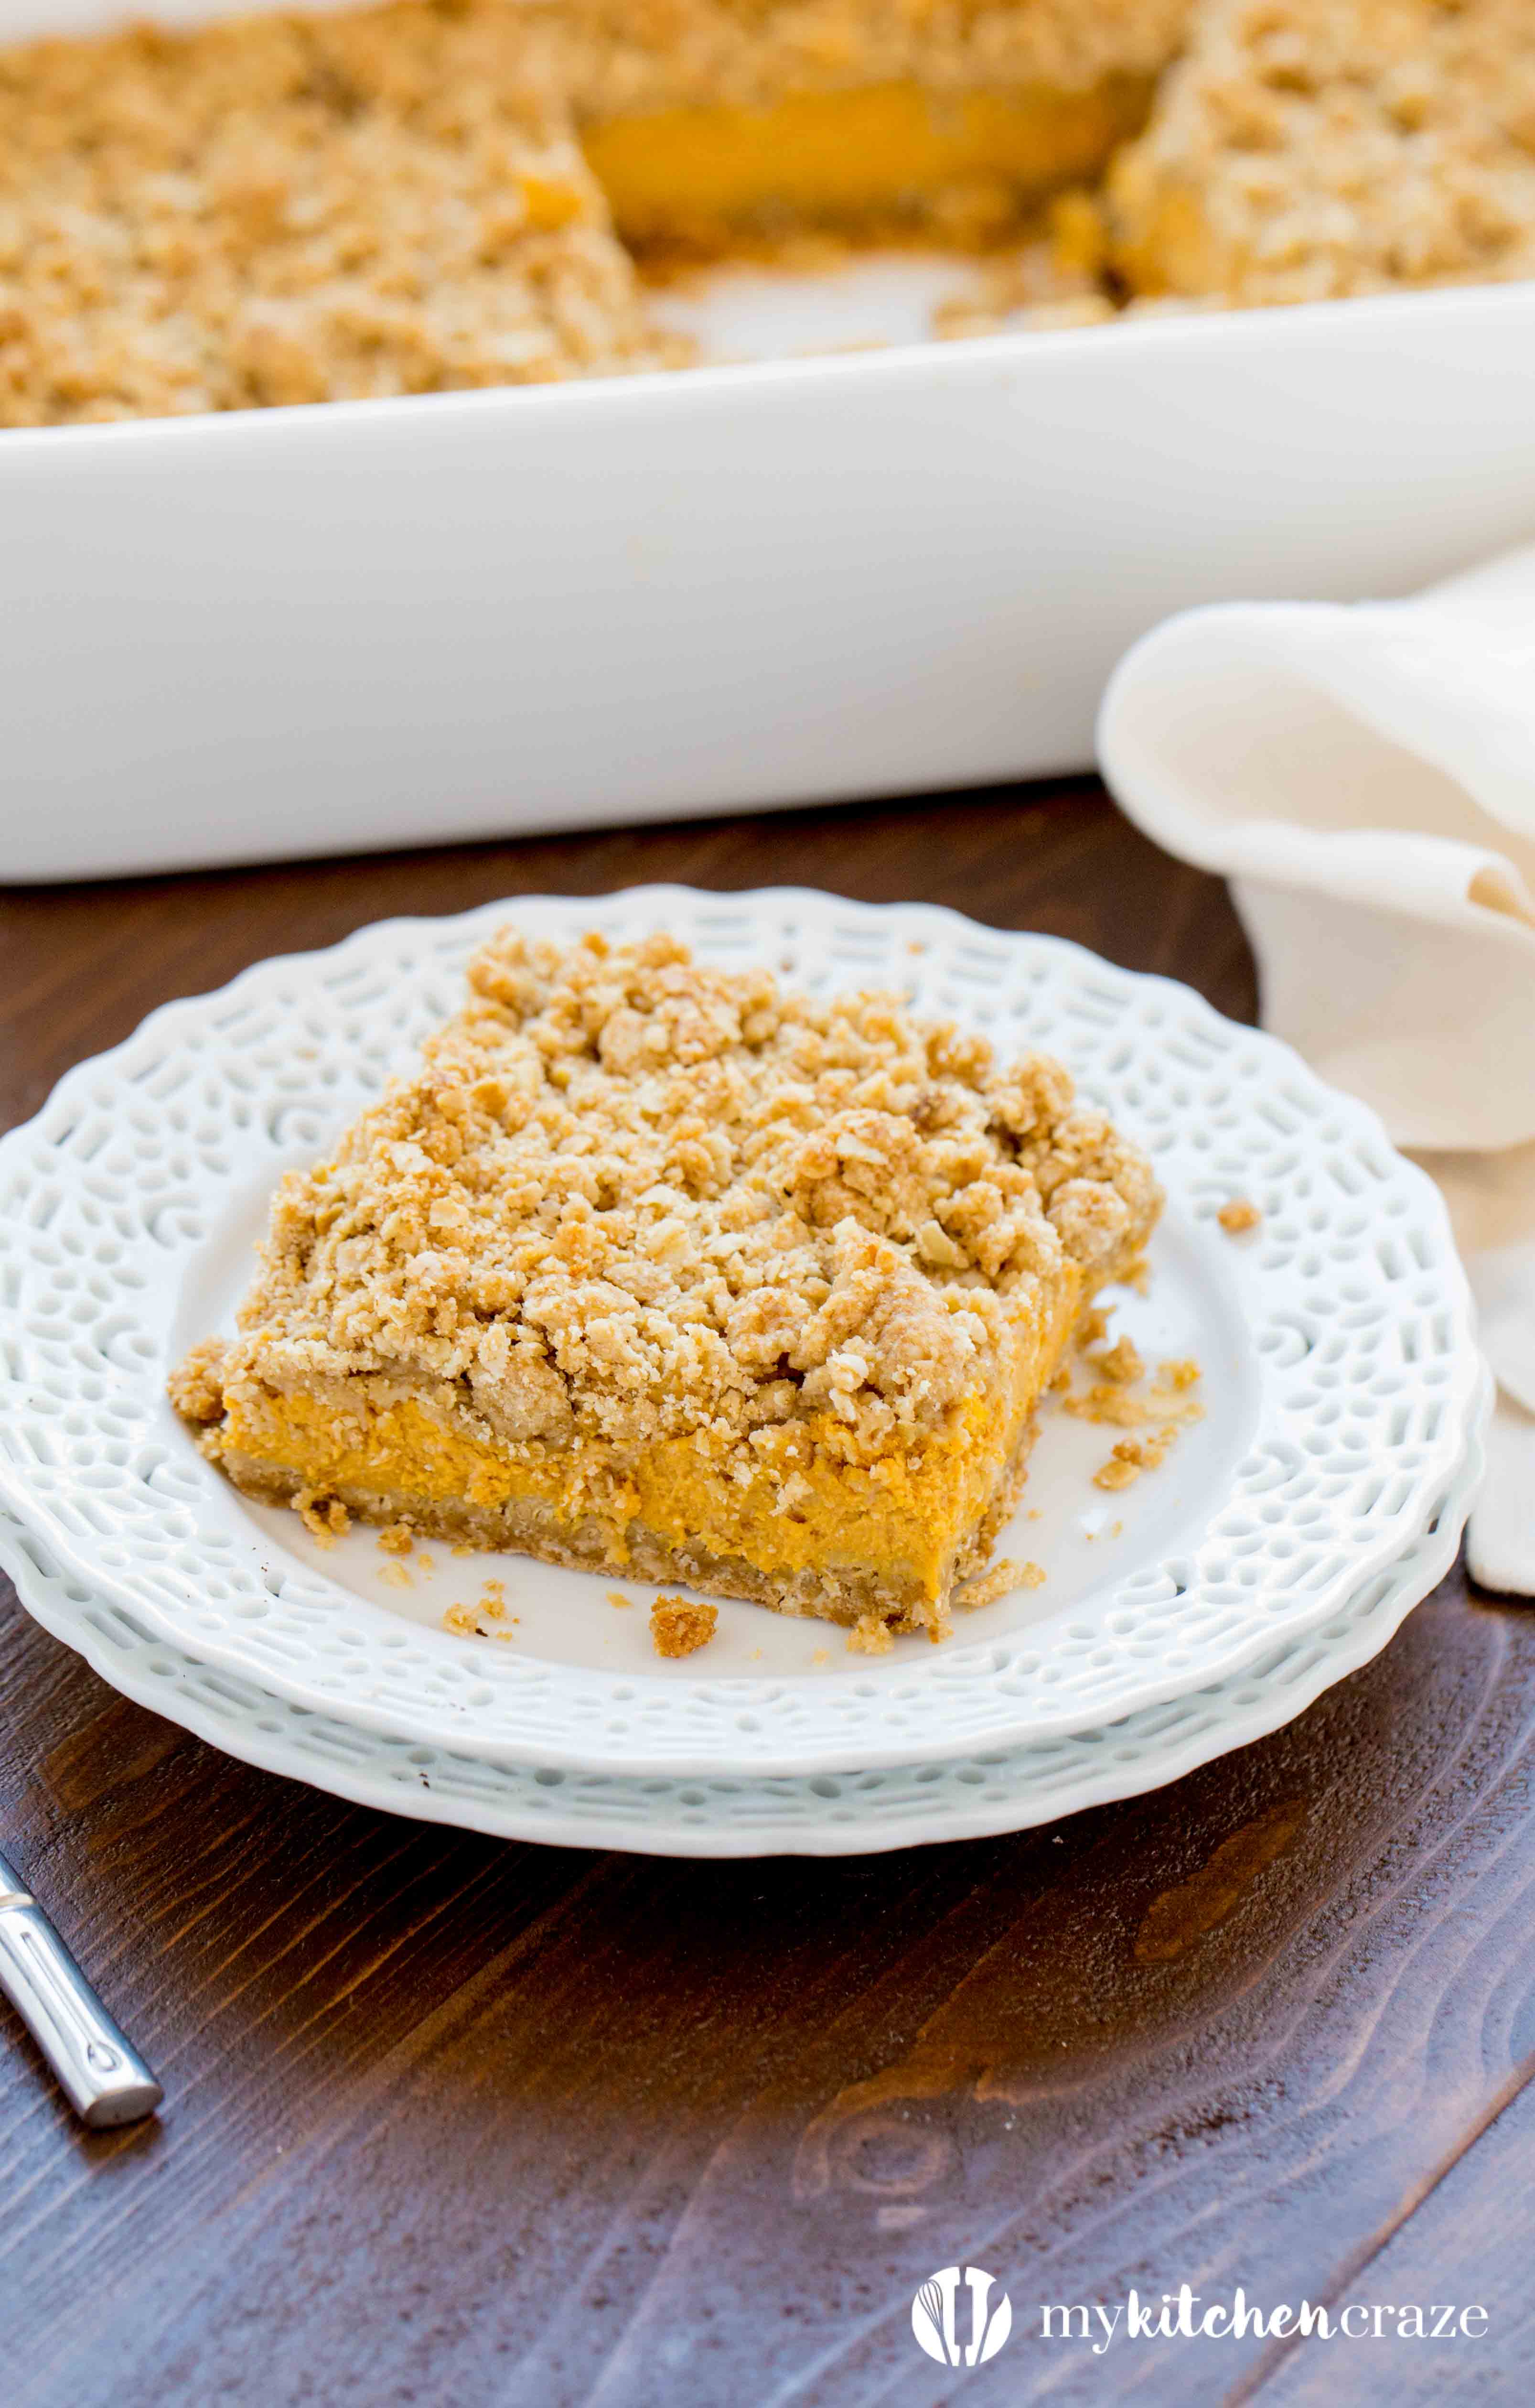 Pumpkin Cheesecake Bars ~ When you combine pumpkin & cheesecake together, what do you get? Delicious PUMPKIN CHEESECAKE BARS! These bars are creamy with a crunchy topping and crust. Yum!